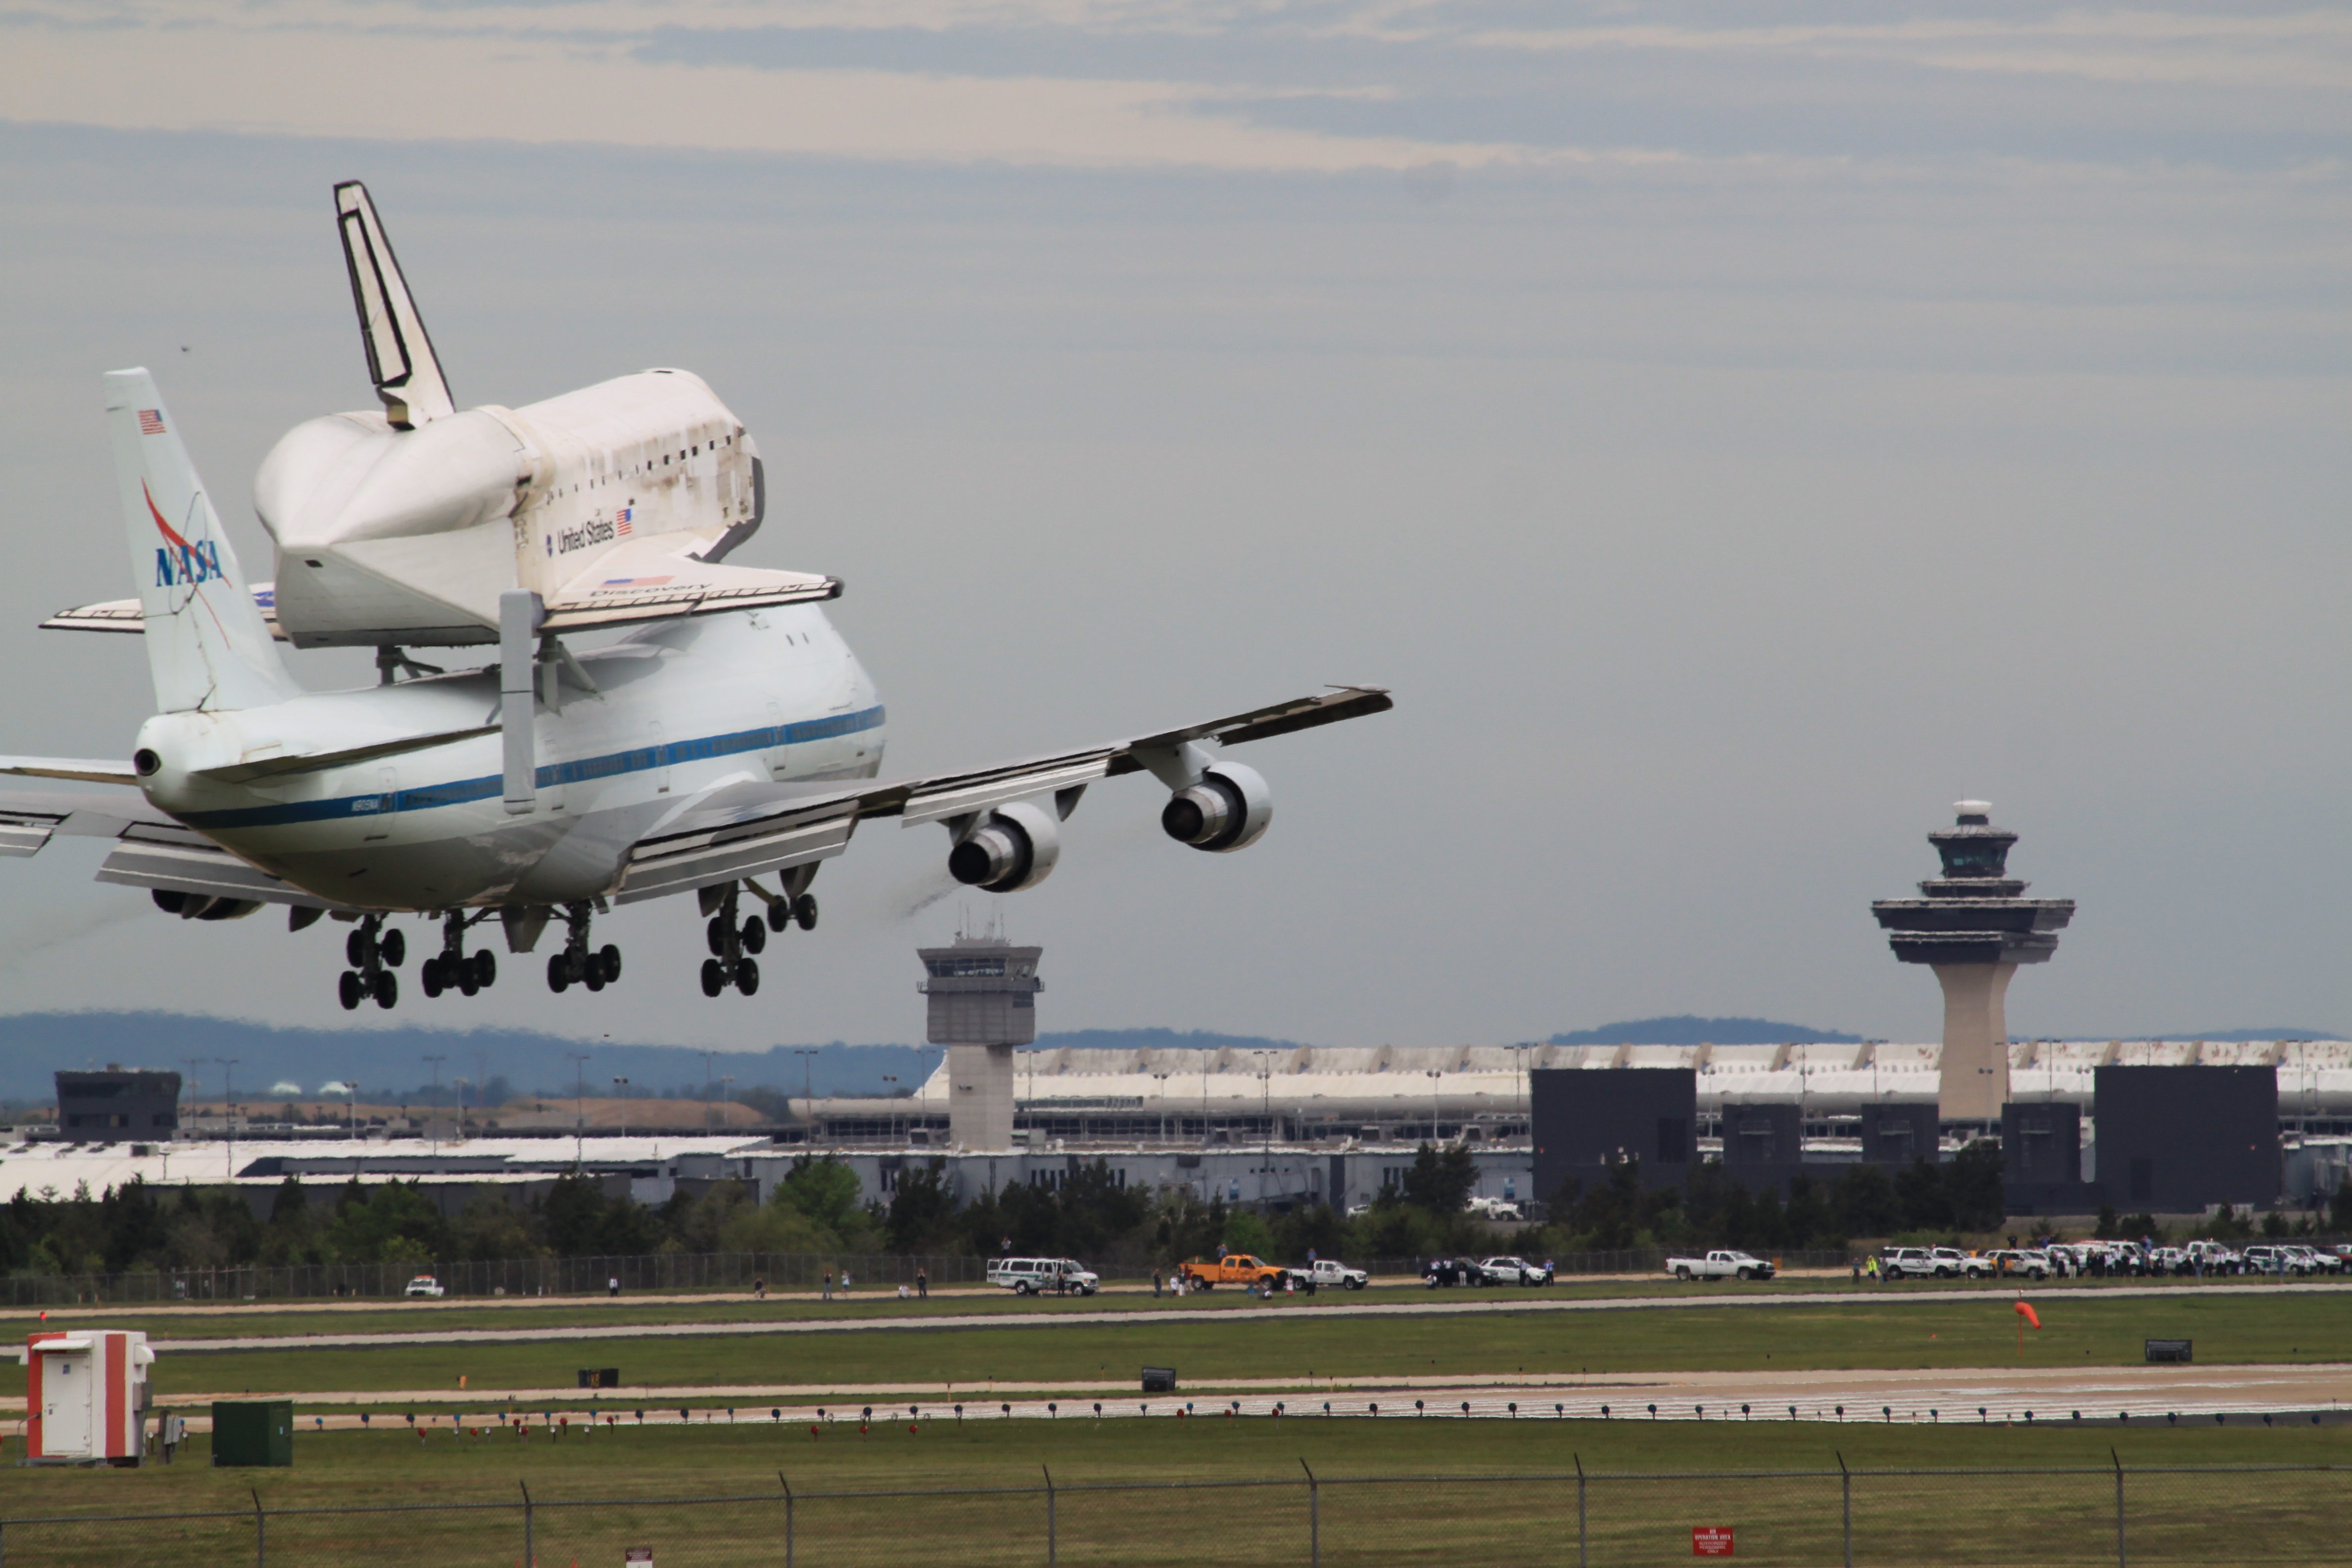 Space Shuttle Discovery landing at Dulles